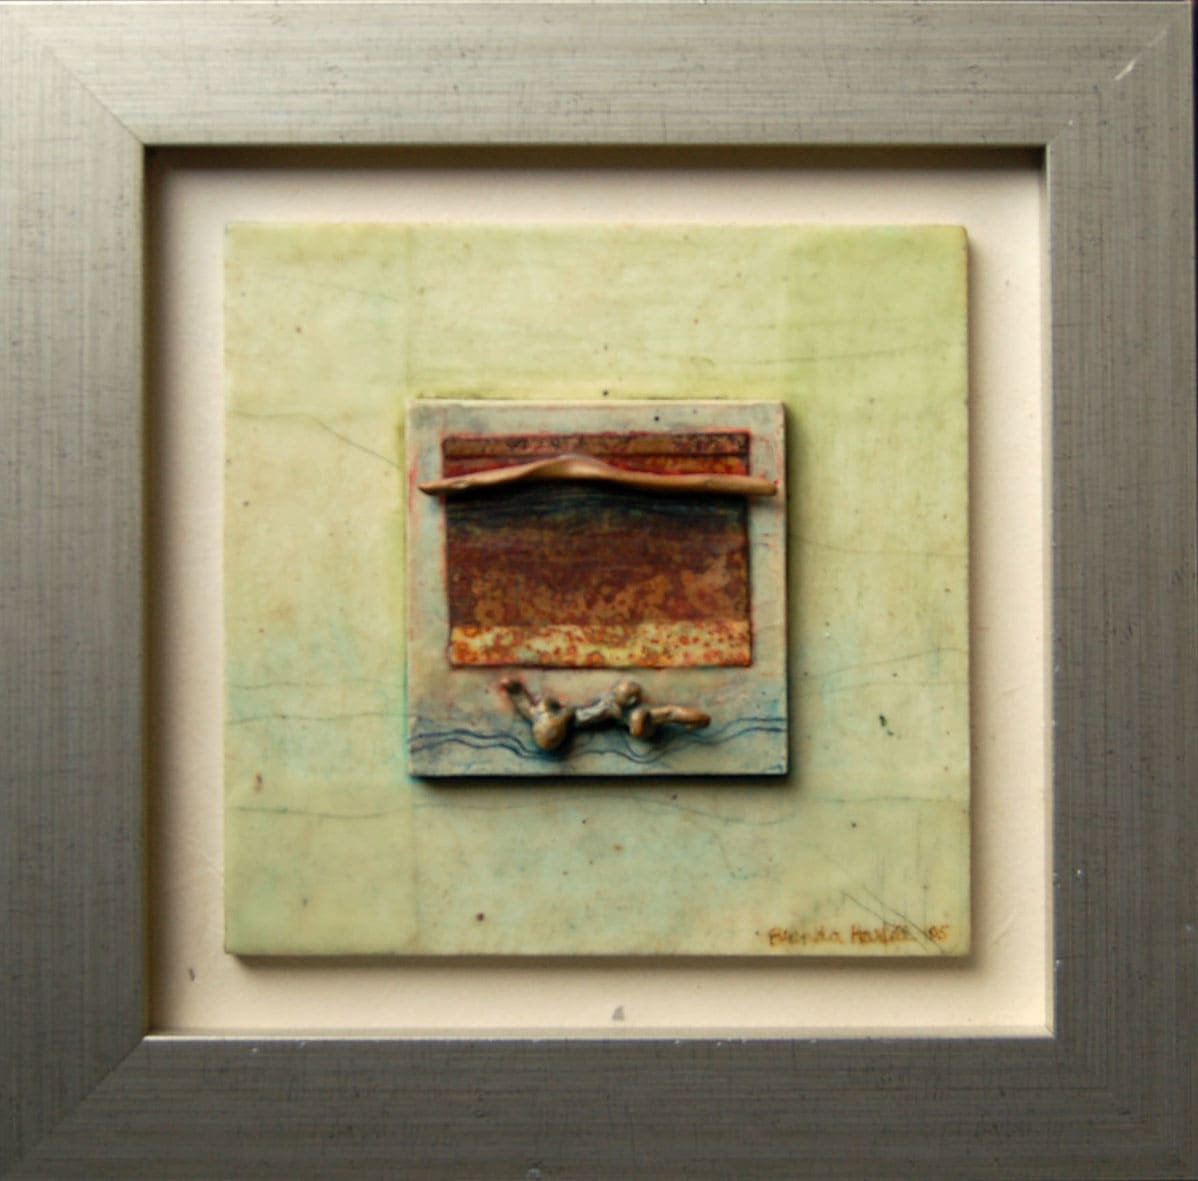 Land Drift II by Brenda Hartill  Image: One of a series of painting/collages embedded in glowing encaustic wax